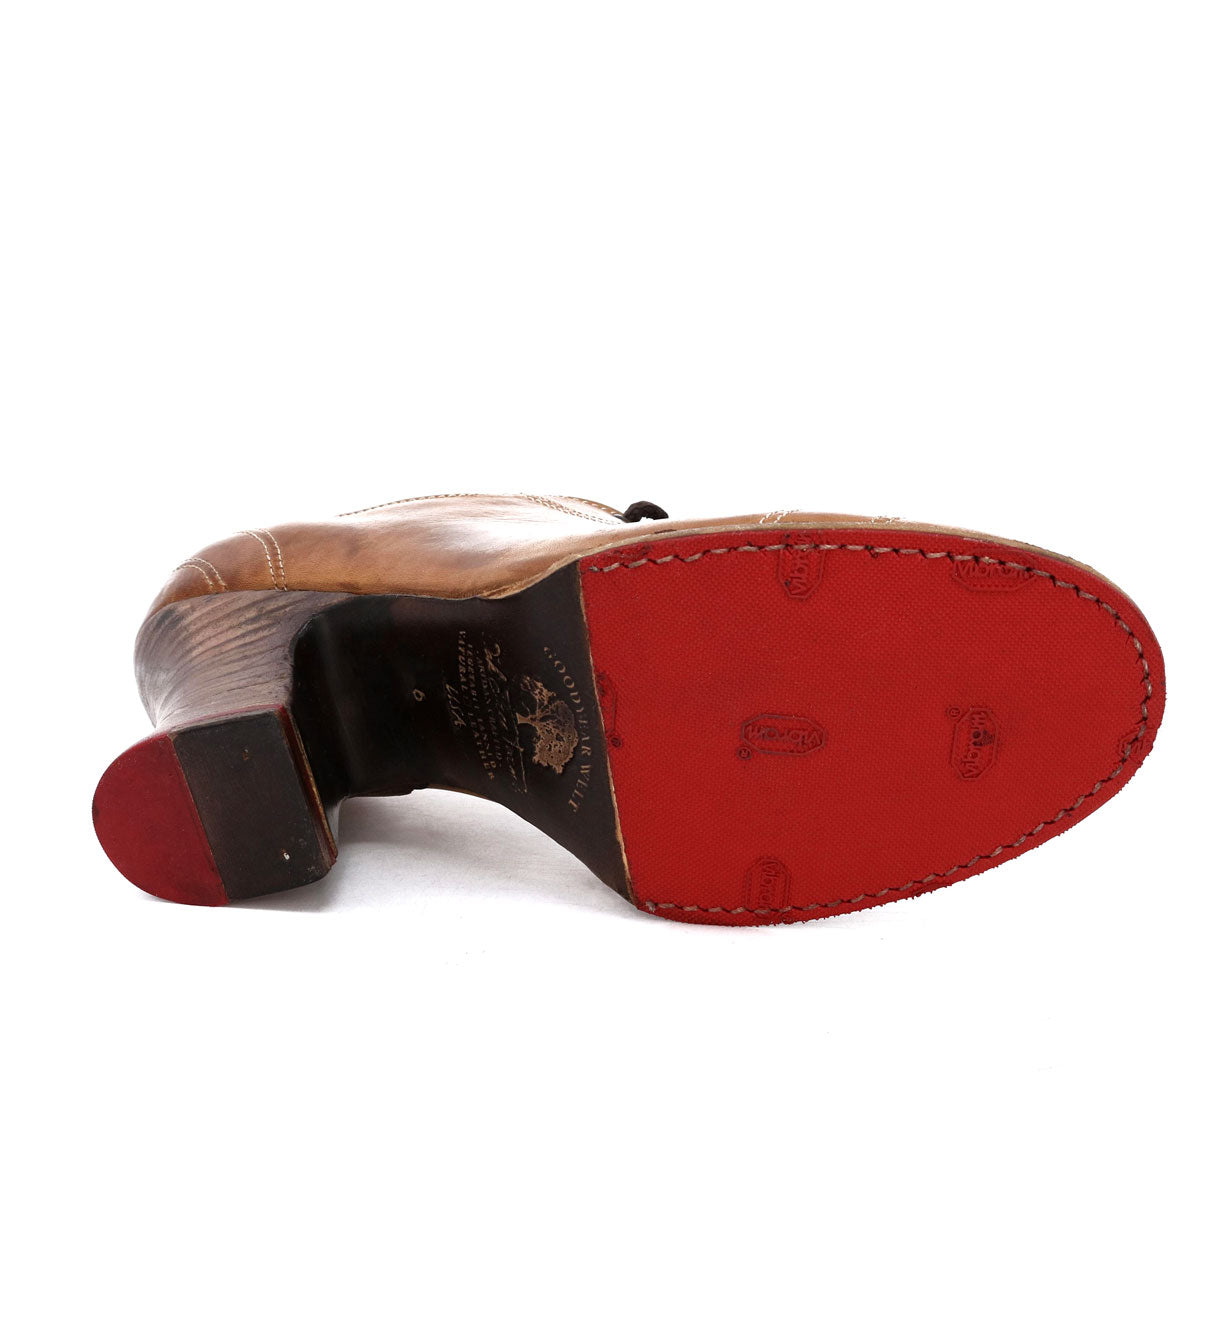 A pair of Oak Tree Farms Nanny red shoes with vibrant soles mesmerizingly enchant the viewer on a crisp white background.